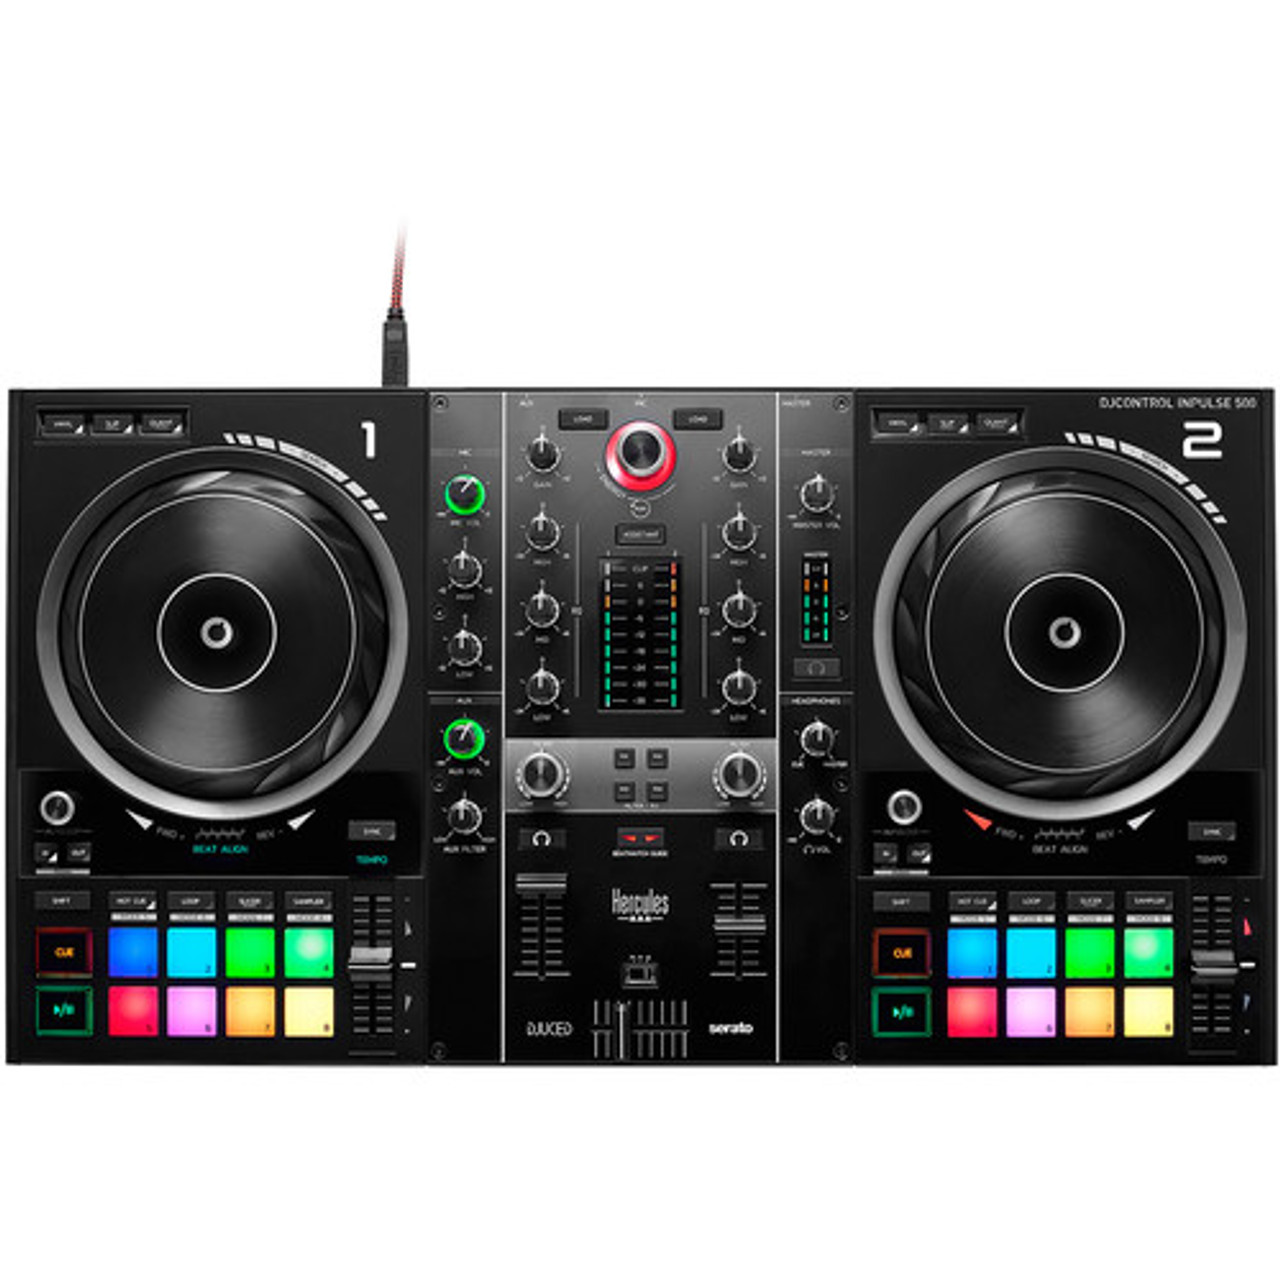 DJUCED – the best DJ Software from beginners to professionals by Hercules